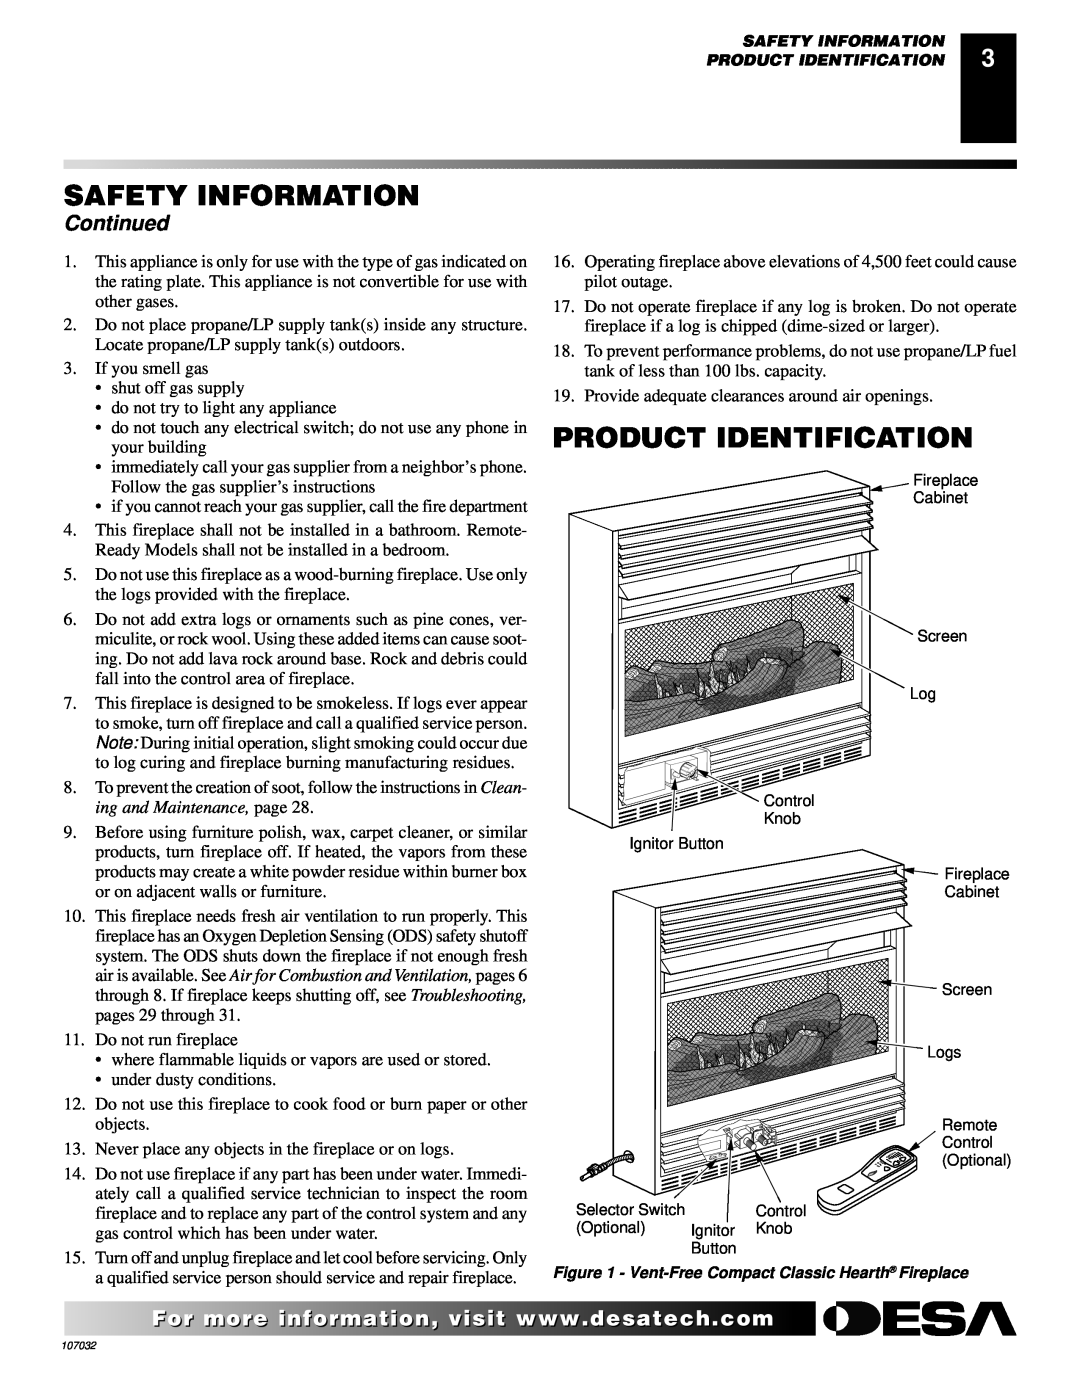 Desa VMH10TPB installation manual Product Identification, Continued, Safety Information 